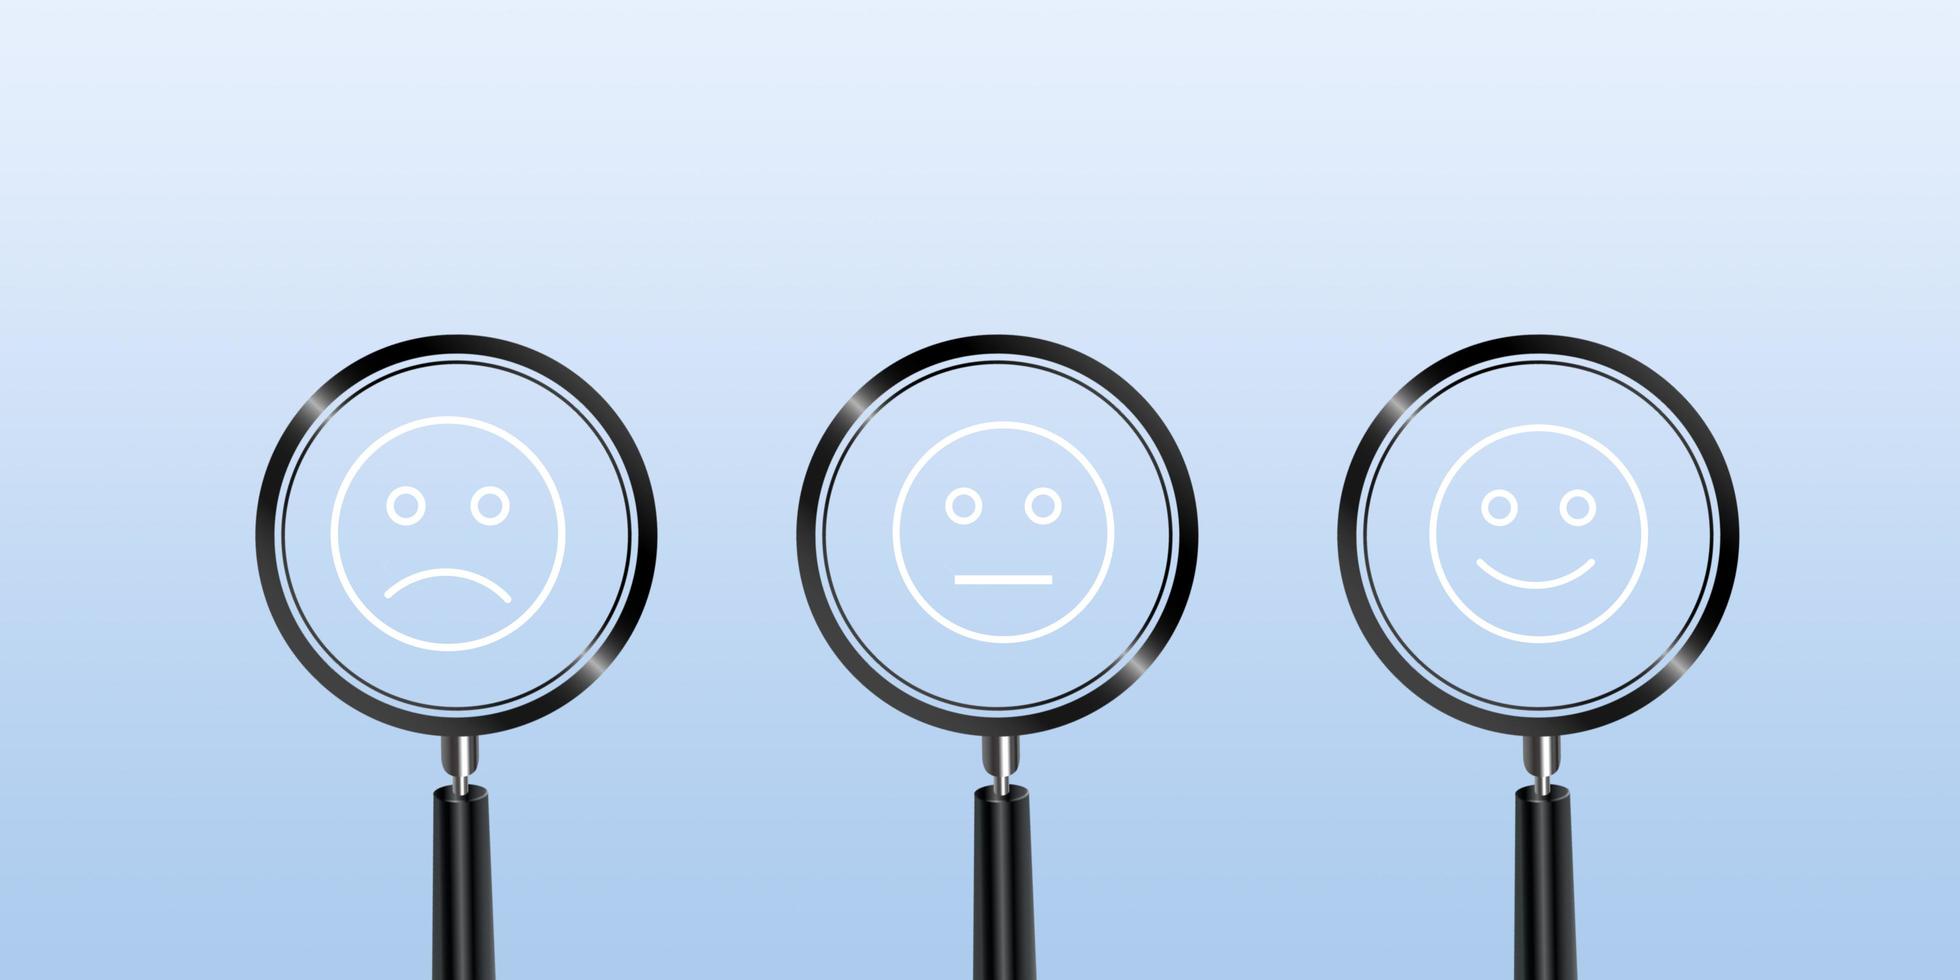 Magnifying glass with a face of emotion symbol. A happy face is used to indicate service rating, ranking, customer review, contentment, and feedback in the business world. photo